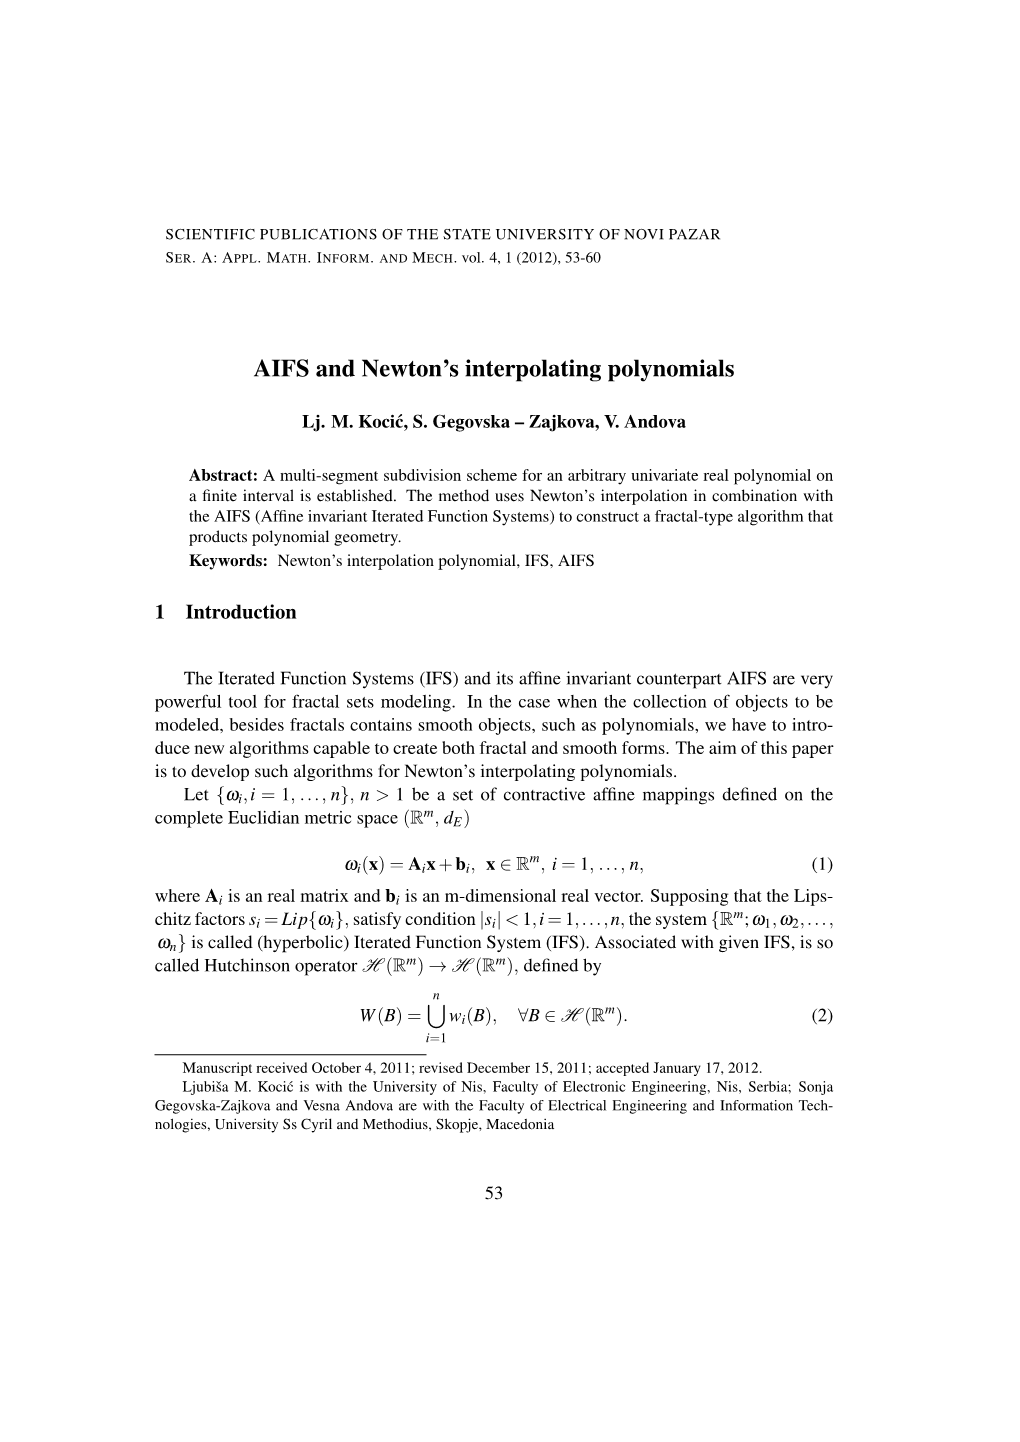 AIFS and Newton's Interpolating Polynomials